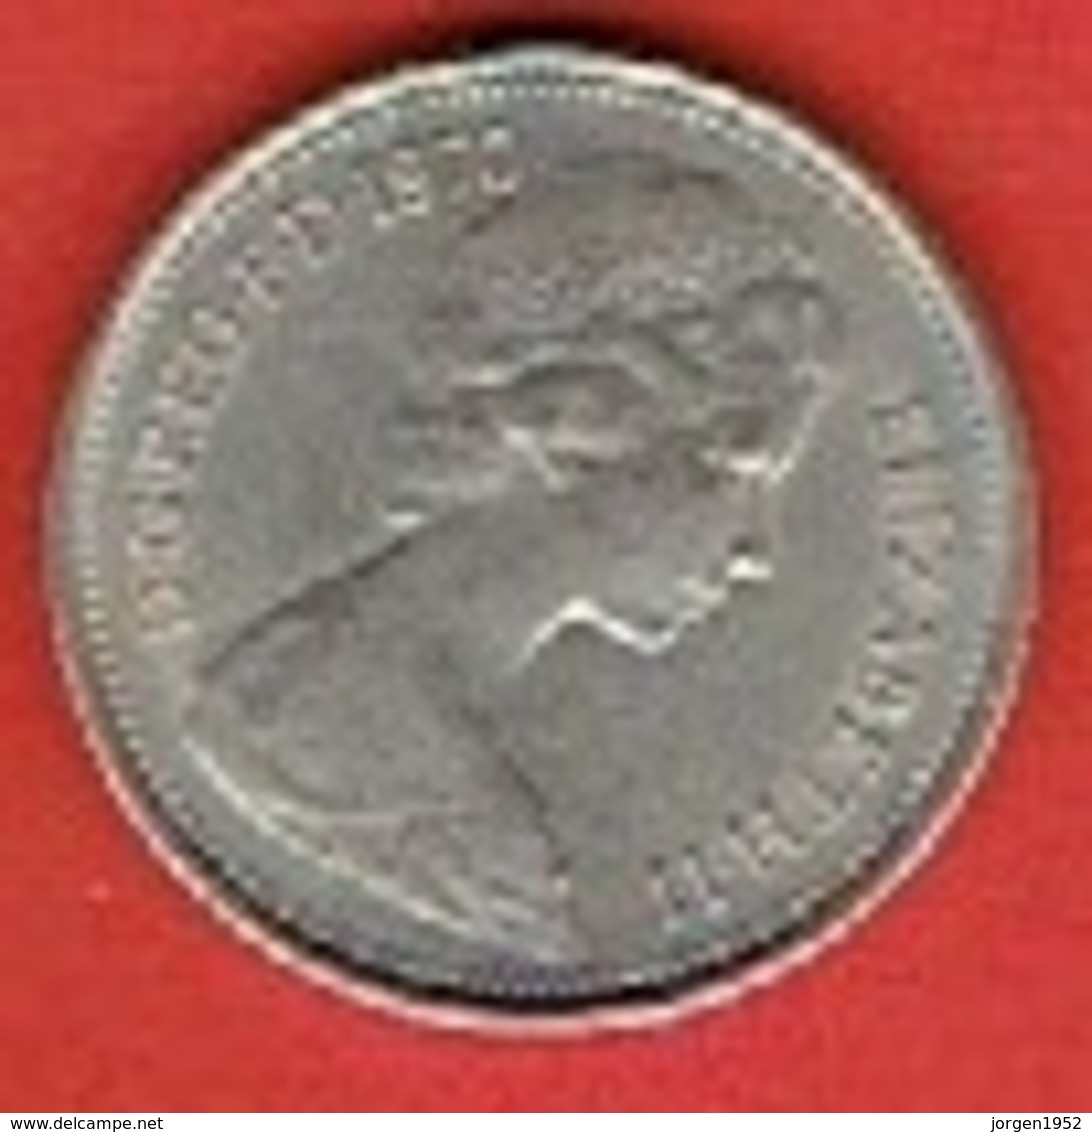 GREAT BRITAIN  # 5 NEW PENCE FROM 1970 - 5 Pence & 5 New Pence